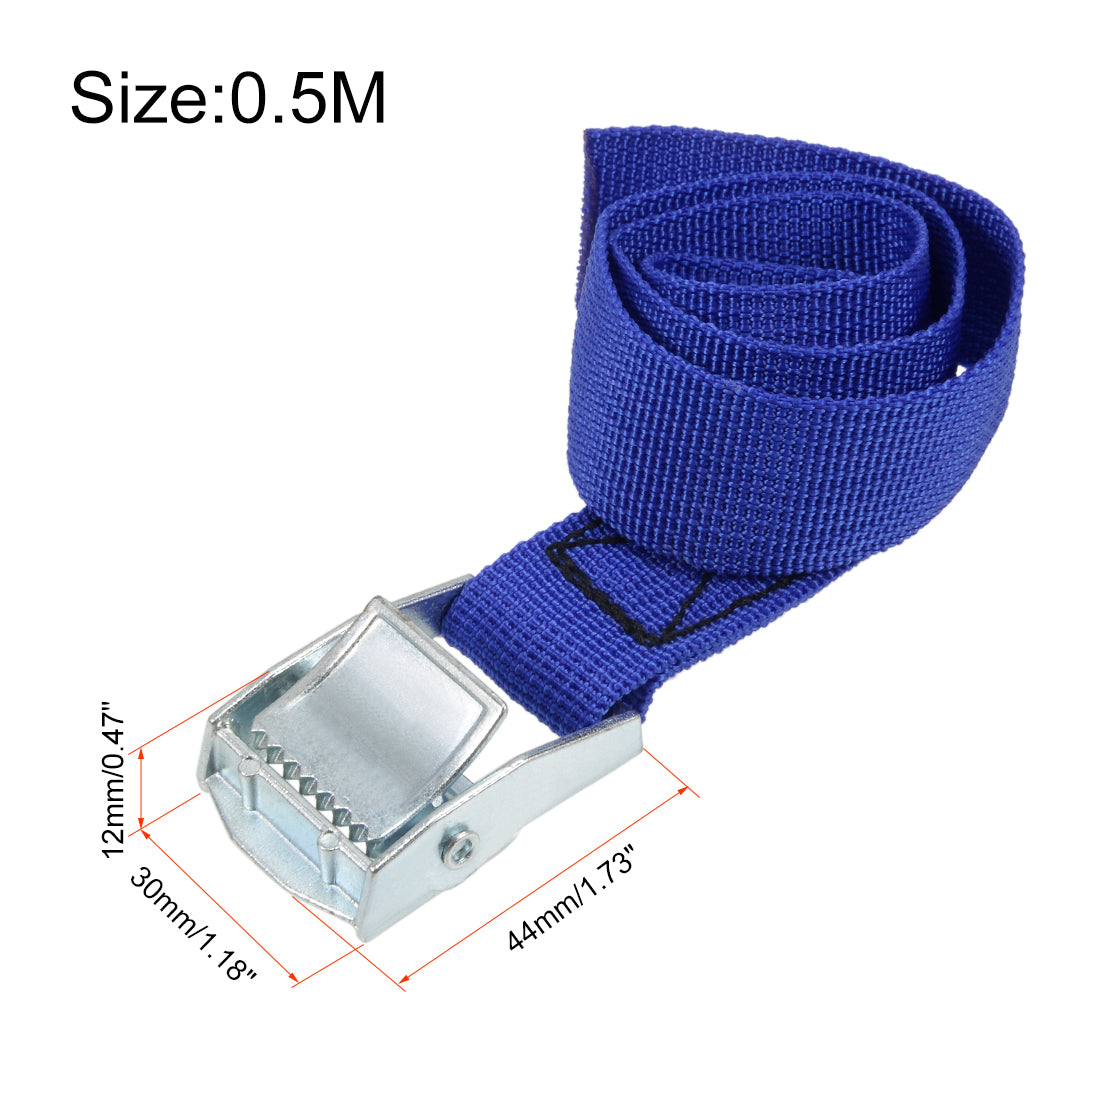 uxcell Uxcell 0.5M x 25mm Lashing Strap Cargo Tie Down Straps w Cam Lock Buckle 250Kg Work Load, Blue, 4Pcs